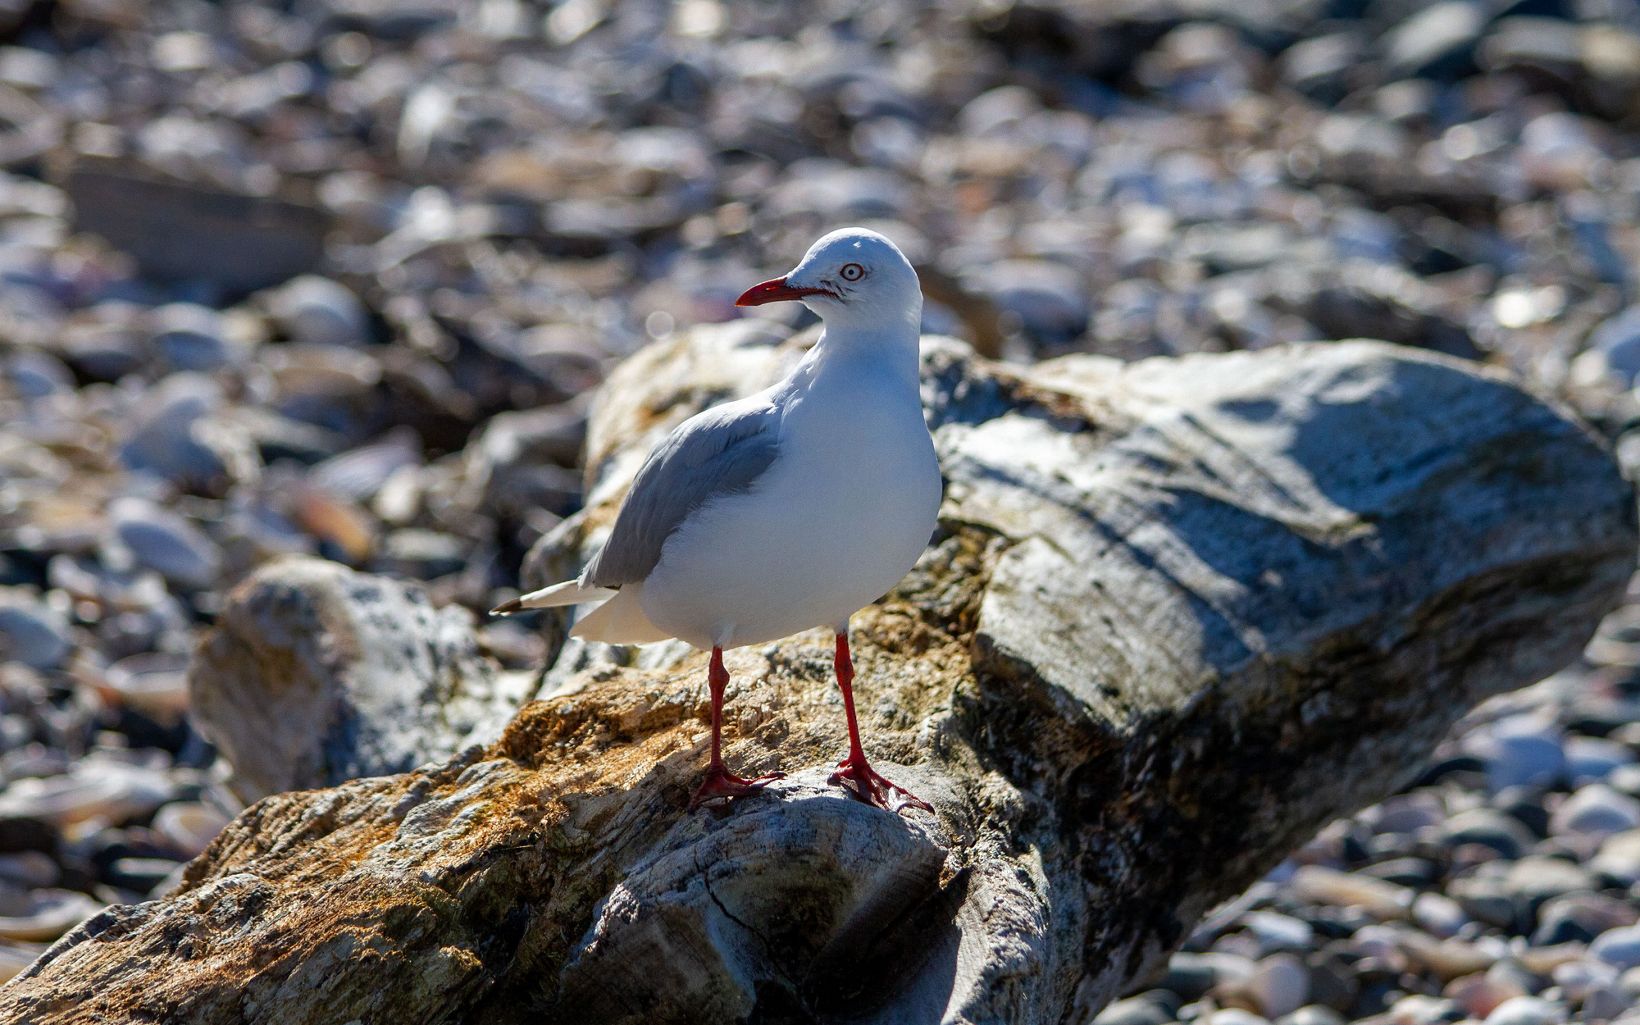 Endemic to New Zealand, this Gull, eyed us hopefully keeping track of crumbs as we finished our snacks on the beach. Red-billed Gulls breed widely on islands such as Otata.